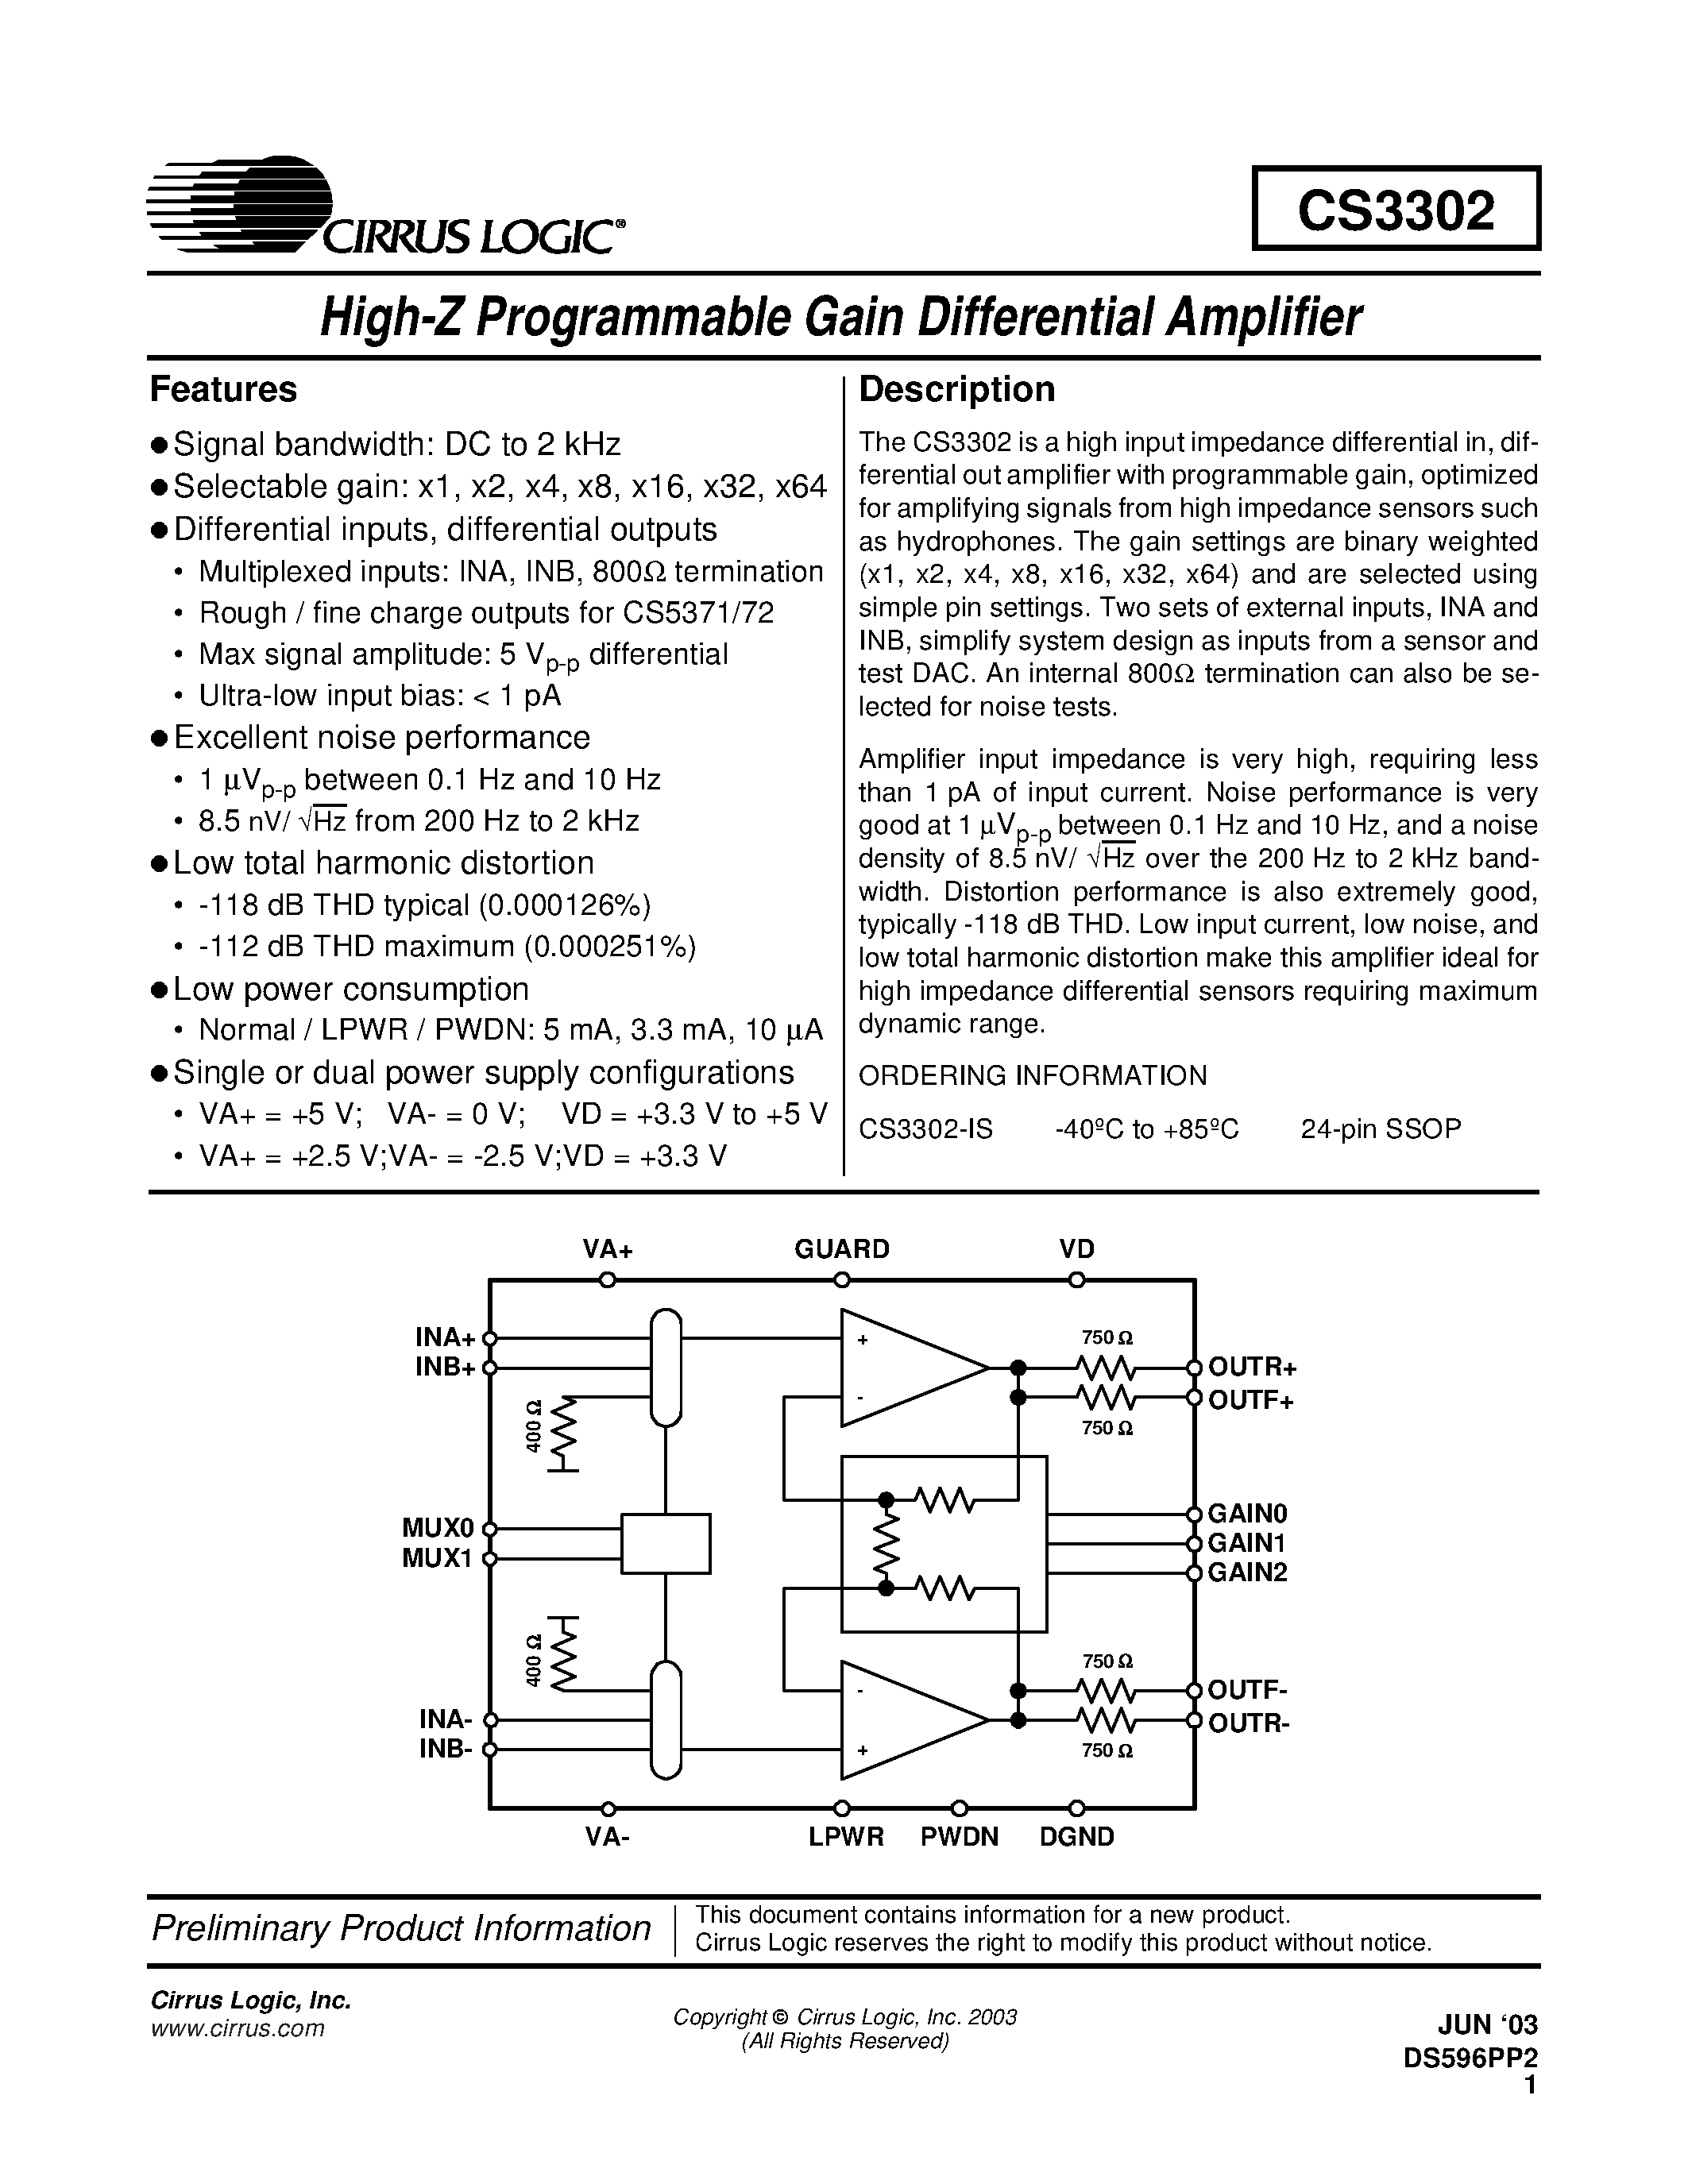 Даташит CS3302-IS - HIGH Z PROGRAMMABLE GAIN DIFFERENTIAL AMPLIFIER страница 1